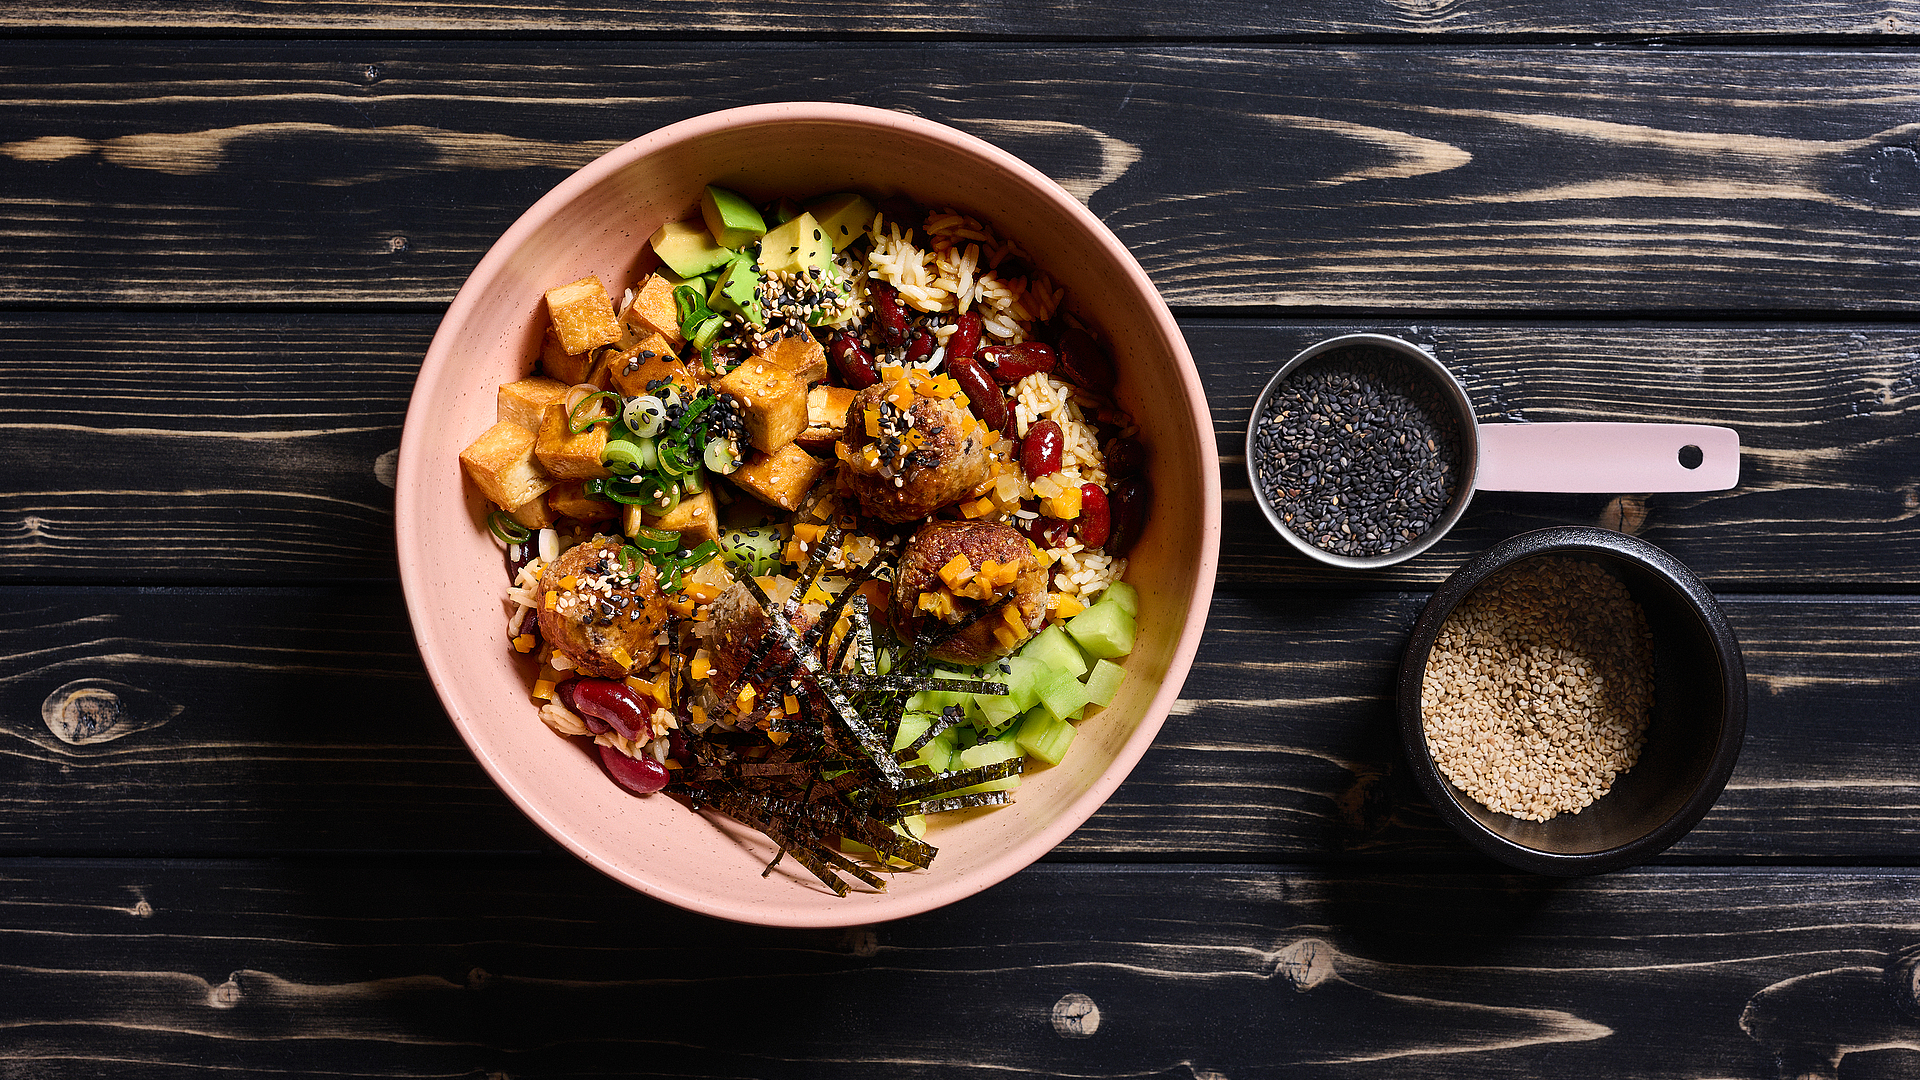 Healthy bowls packed with flavour